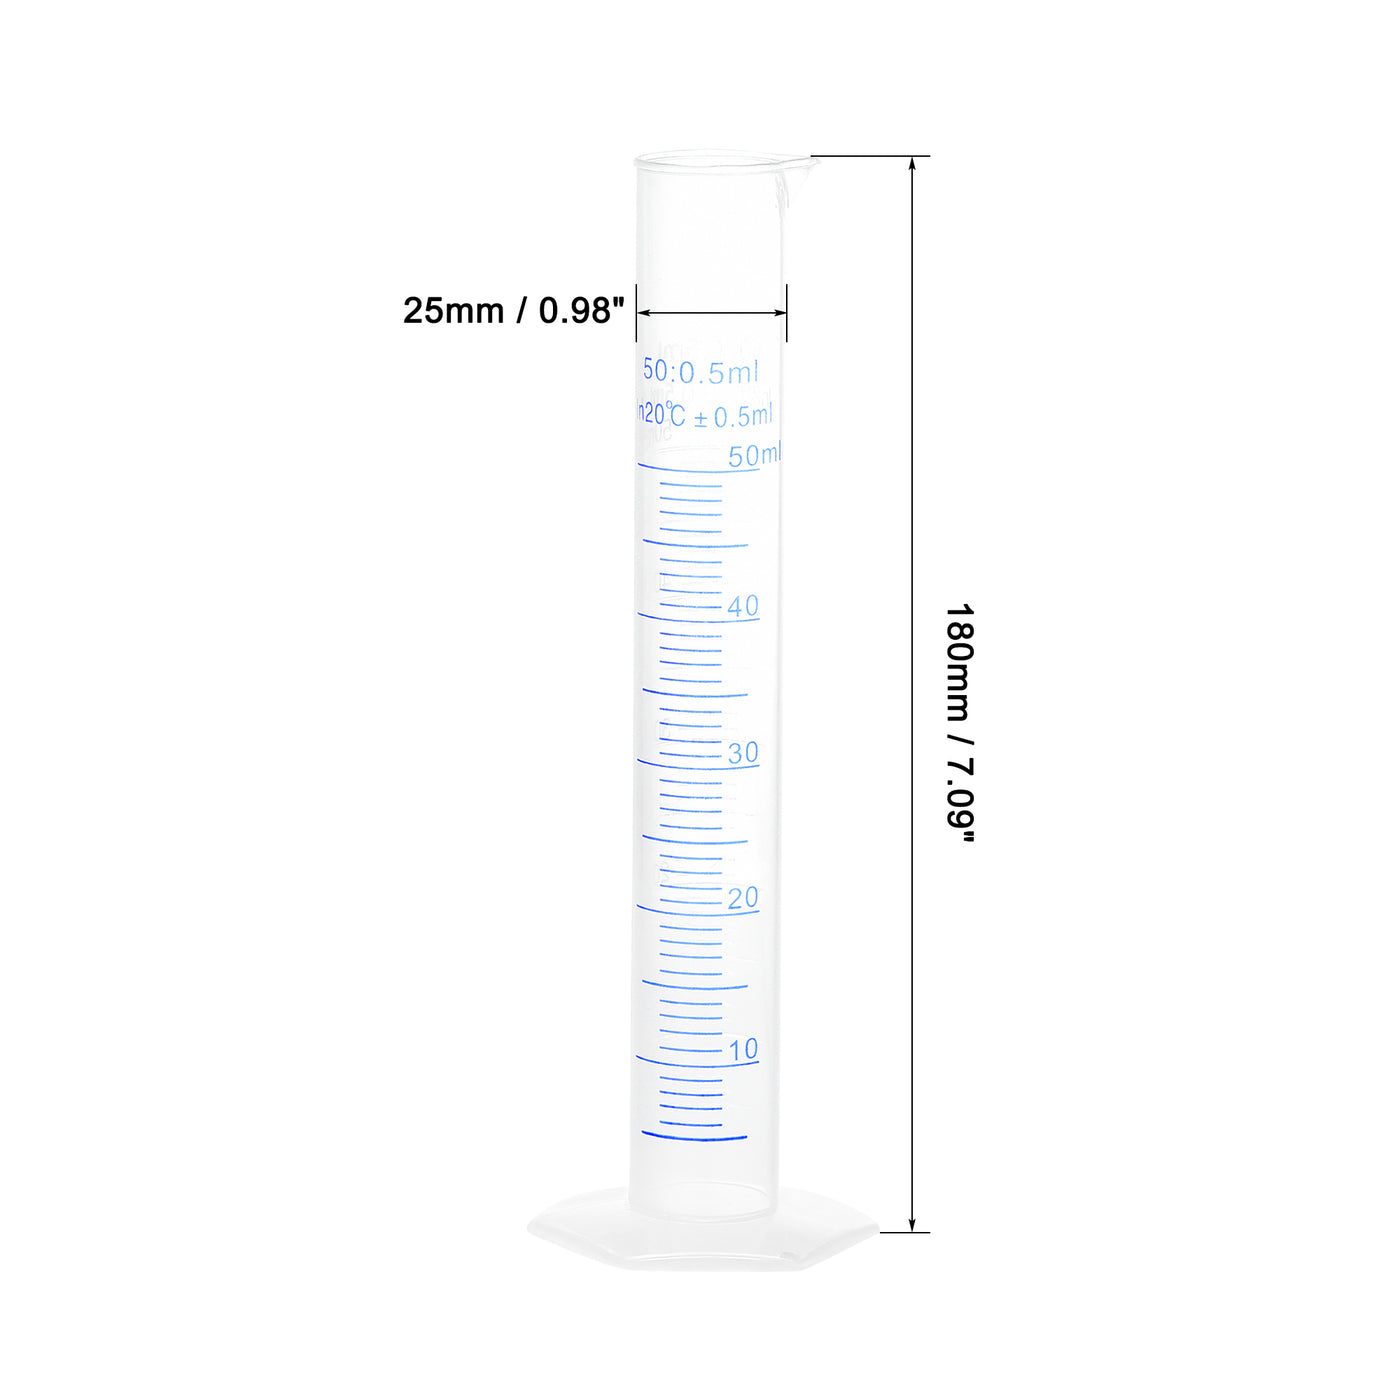 uxcell Uxcell Plastic Graduated Cylinder, 50ml Measuring Cylinder 2-Sided Metric Marking 4Pcs